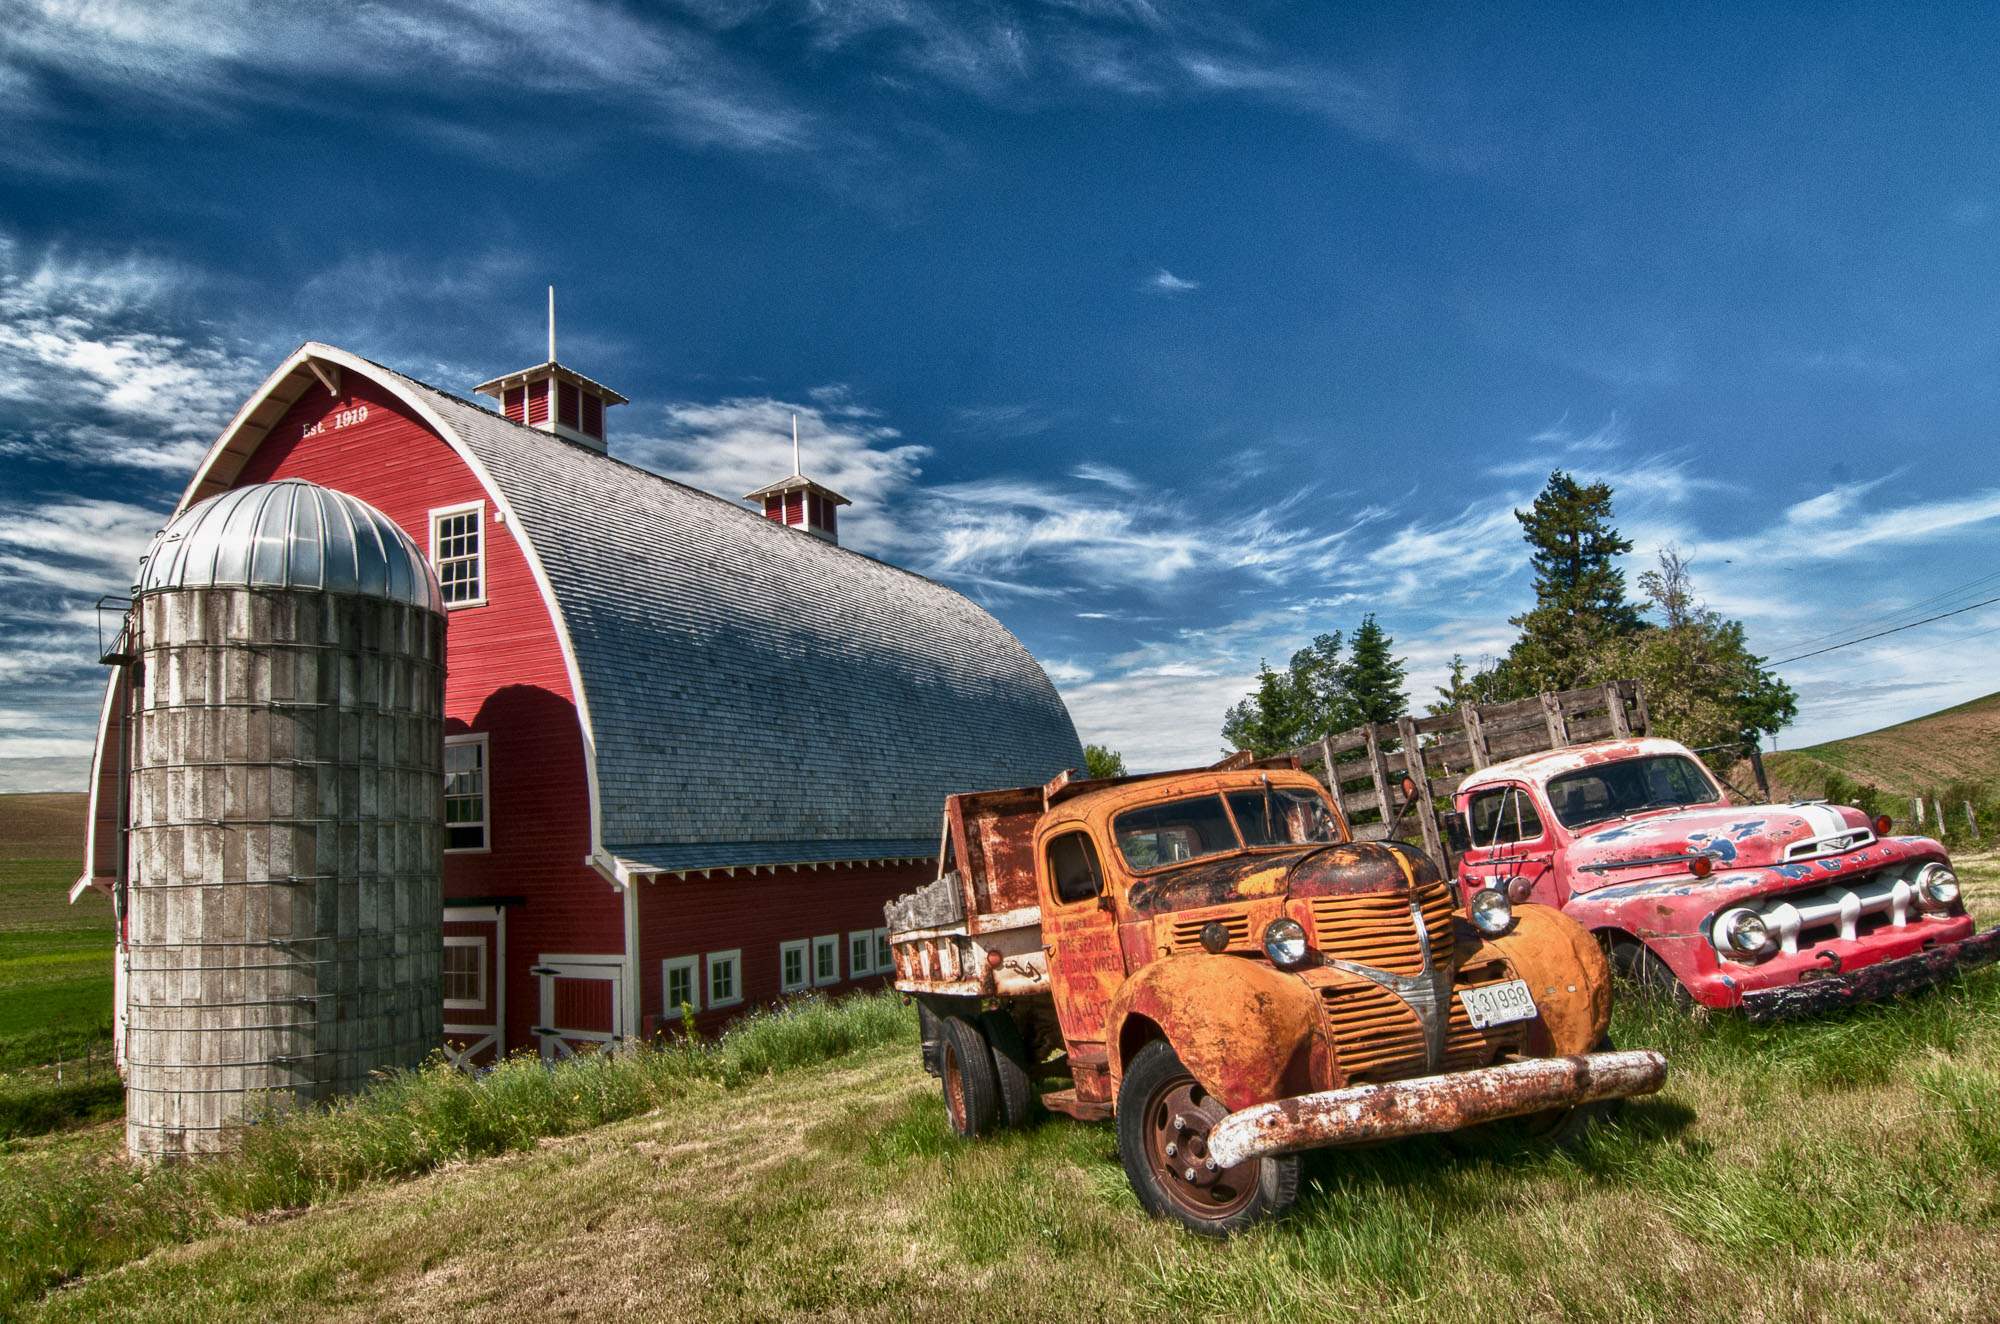 Barbee_120619_3_5865_HDR  | Syntax Error: unexpected symbol near 'then' Old trucks near red barn outside of Colfax, WA - HDR image